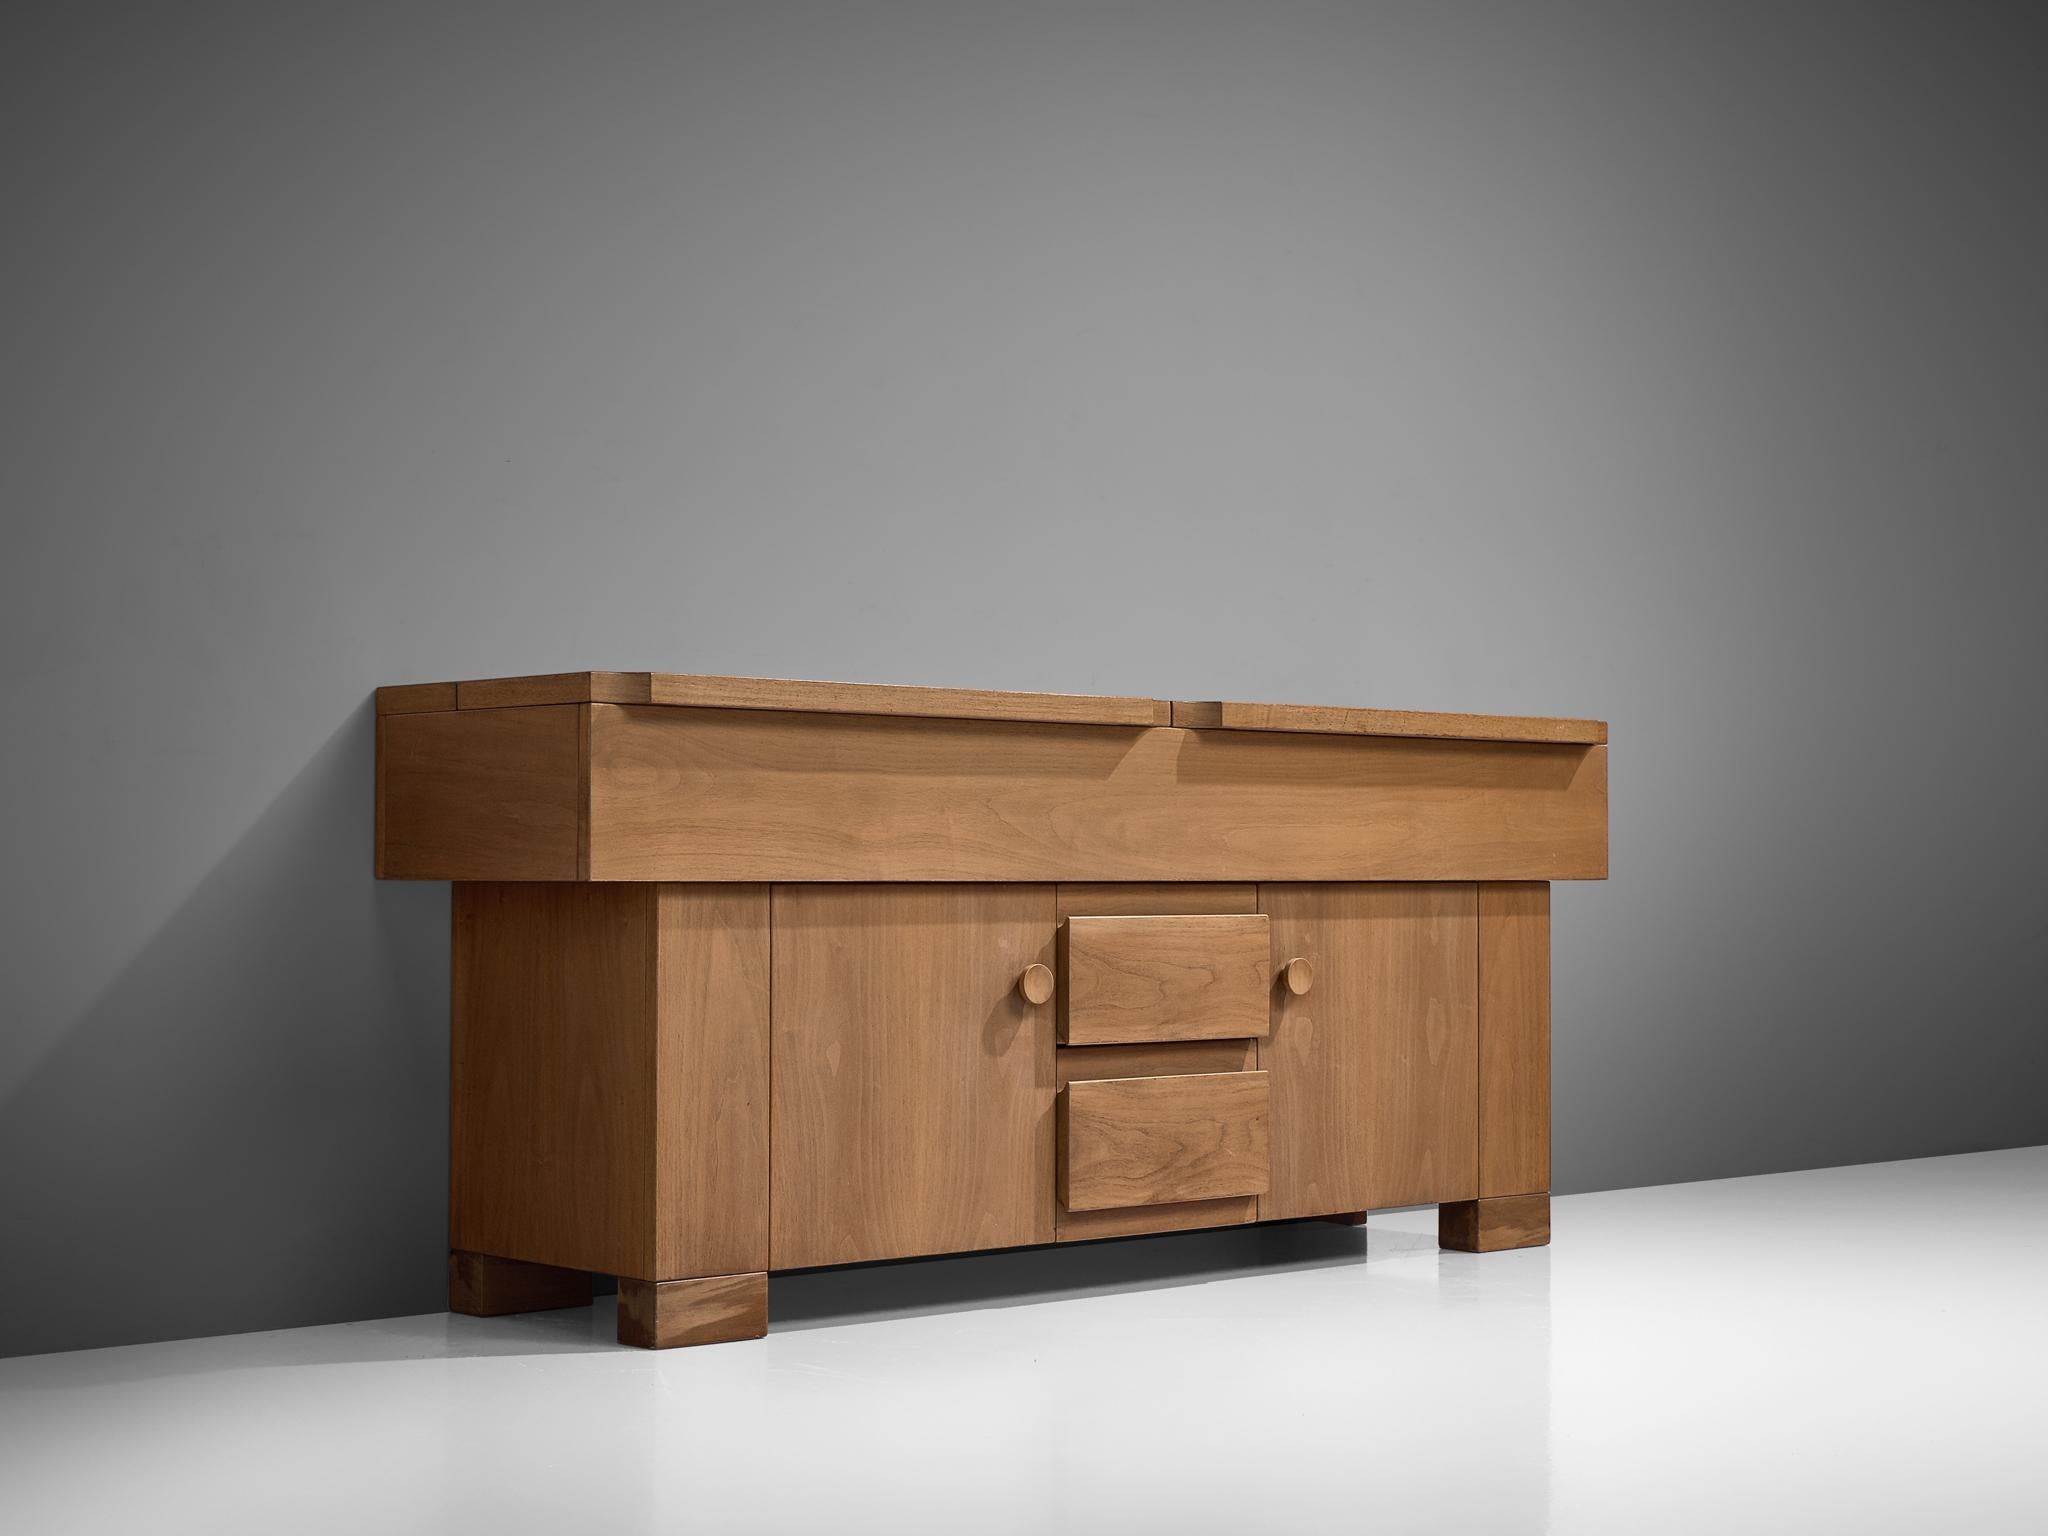 Giovanni Michelucci, sideboard, walnut Italy, 1964.

This cabinet will brighten up your interior through its solid and grand appearance. It is a stunning cabinet in beautiful teak. The horizontal and vertical lines give it an architectural